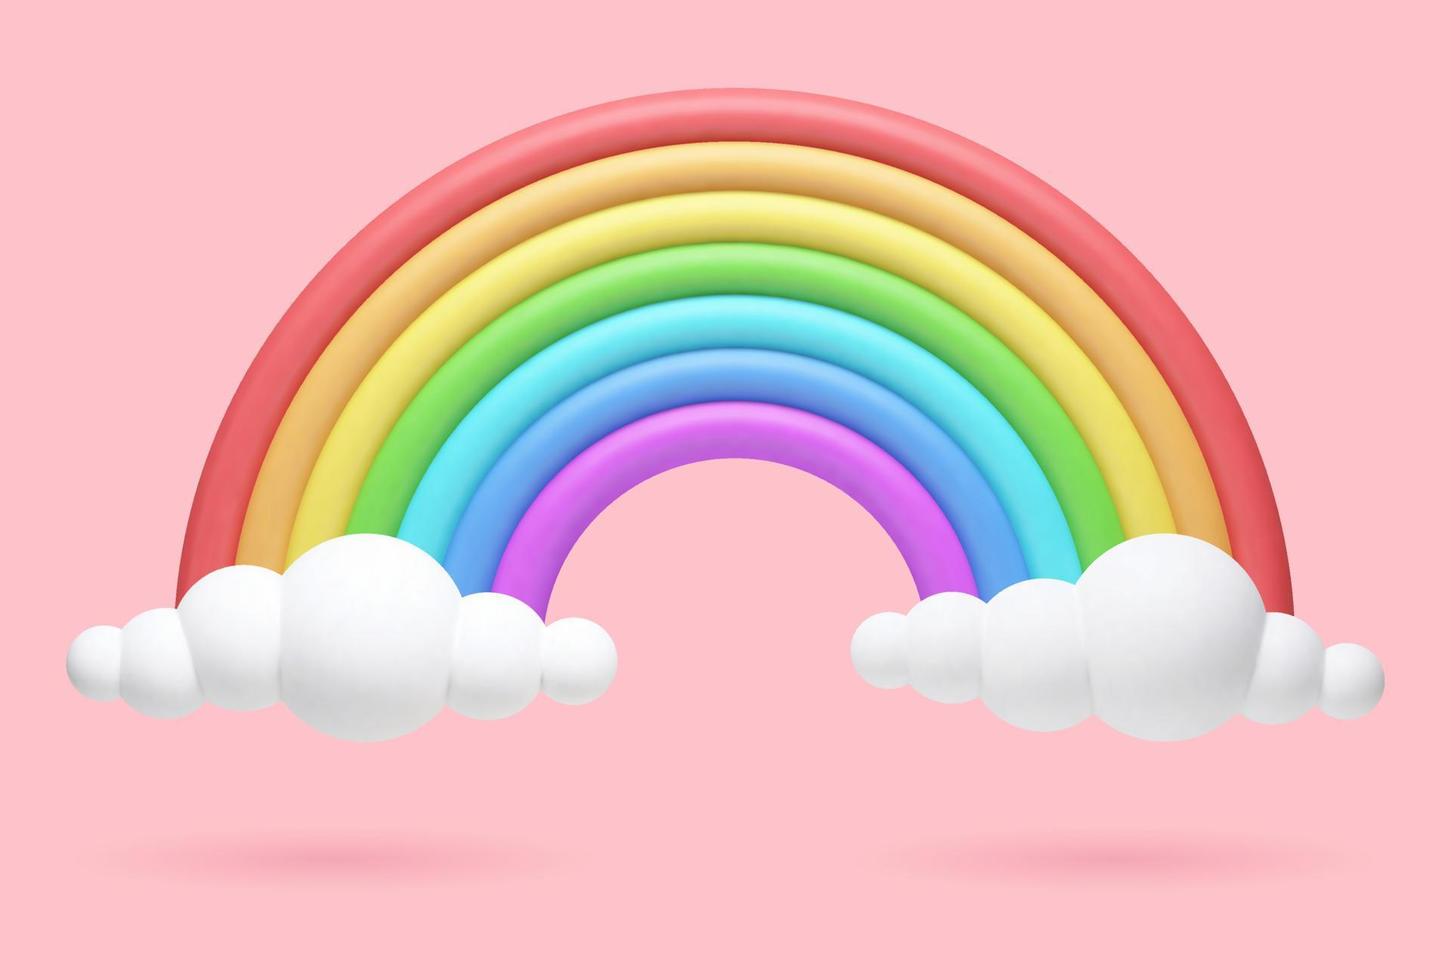 Vector 3d realistic illustration of a 7-color rainbow on a pink background with clouds